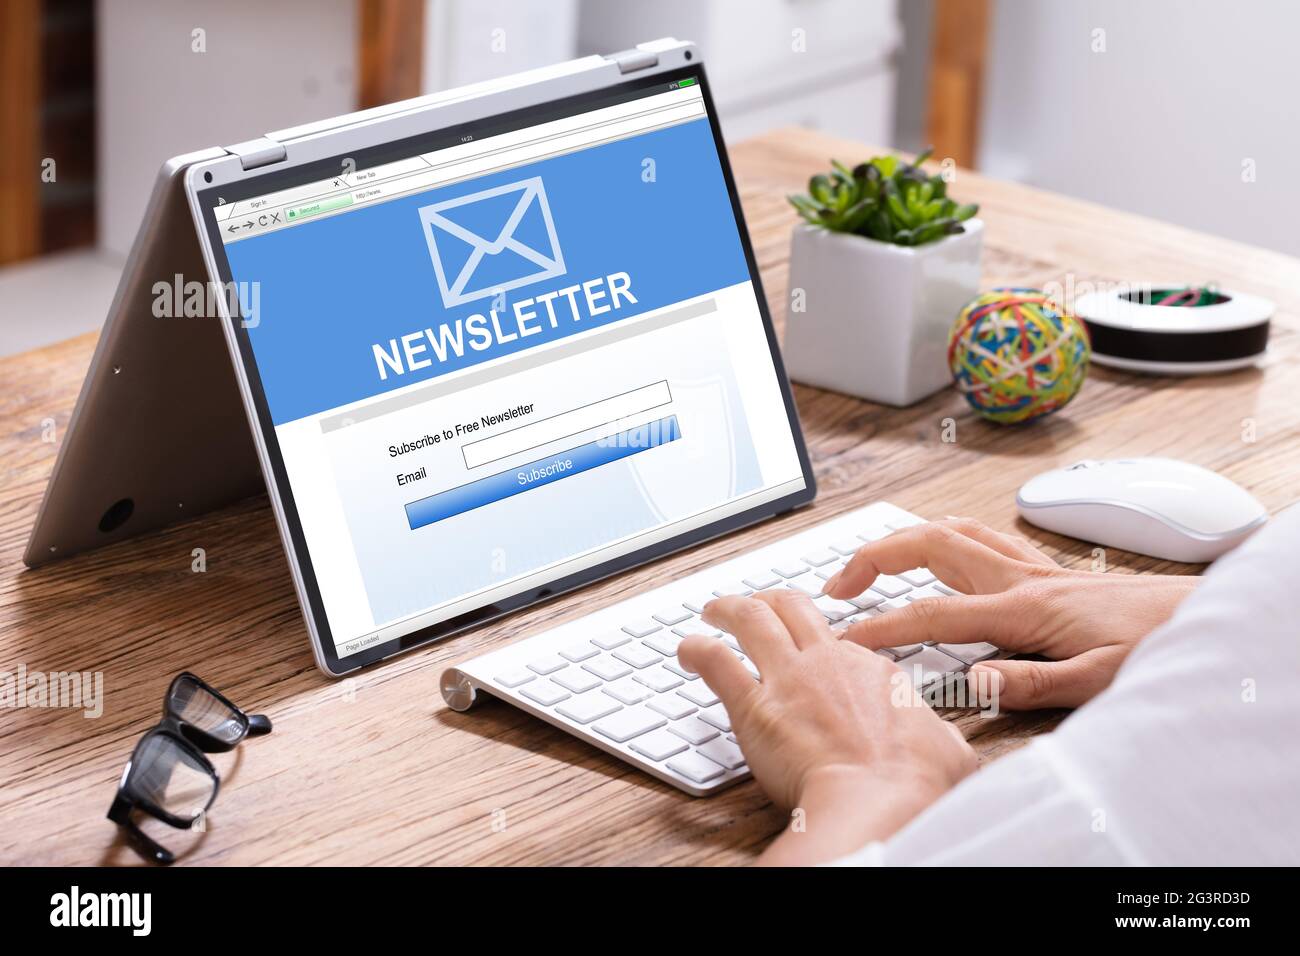 Business Newsletter Membership Subscribe. Internet Technology And Online Advertising Stock Photo